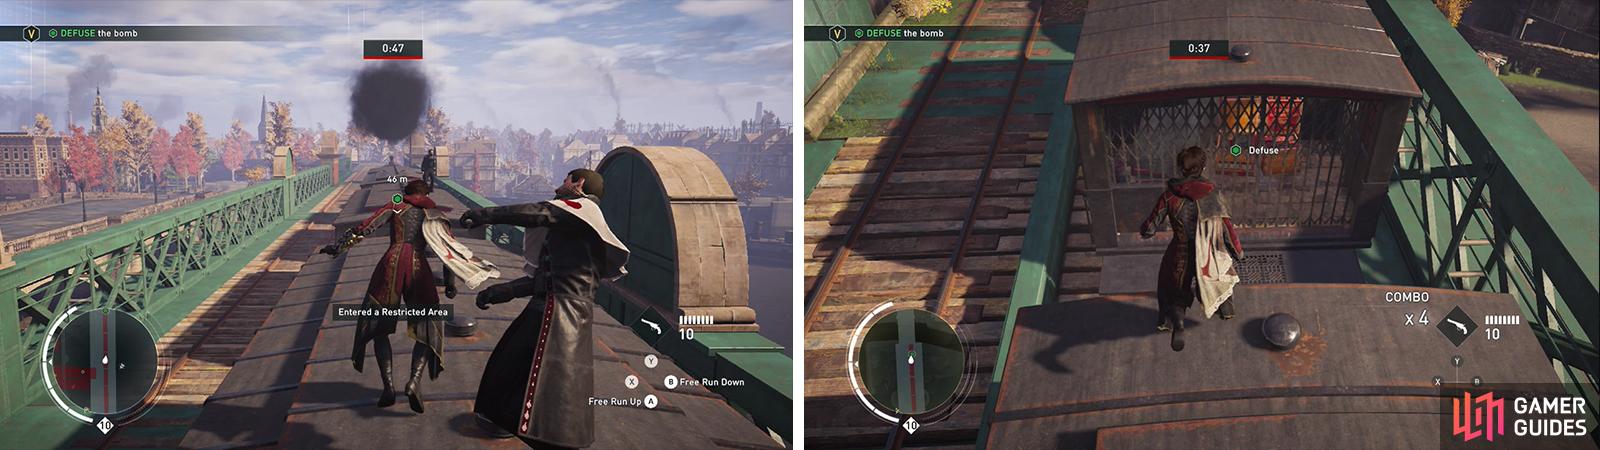 Make your way across the top of the train (left) and interact with the crates by the locomotive at the front (right).